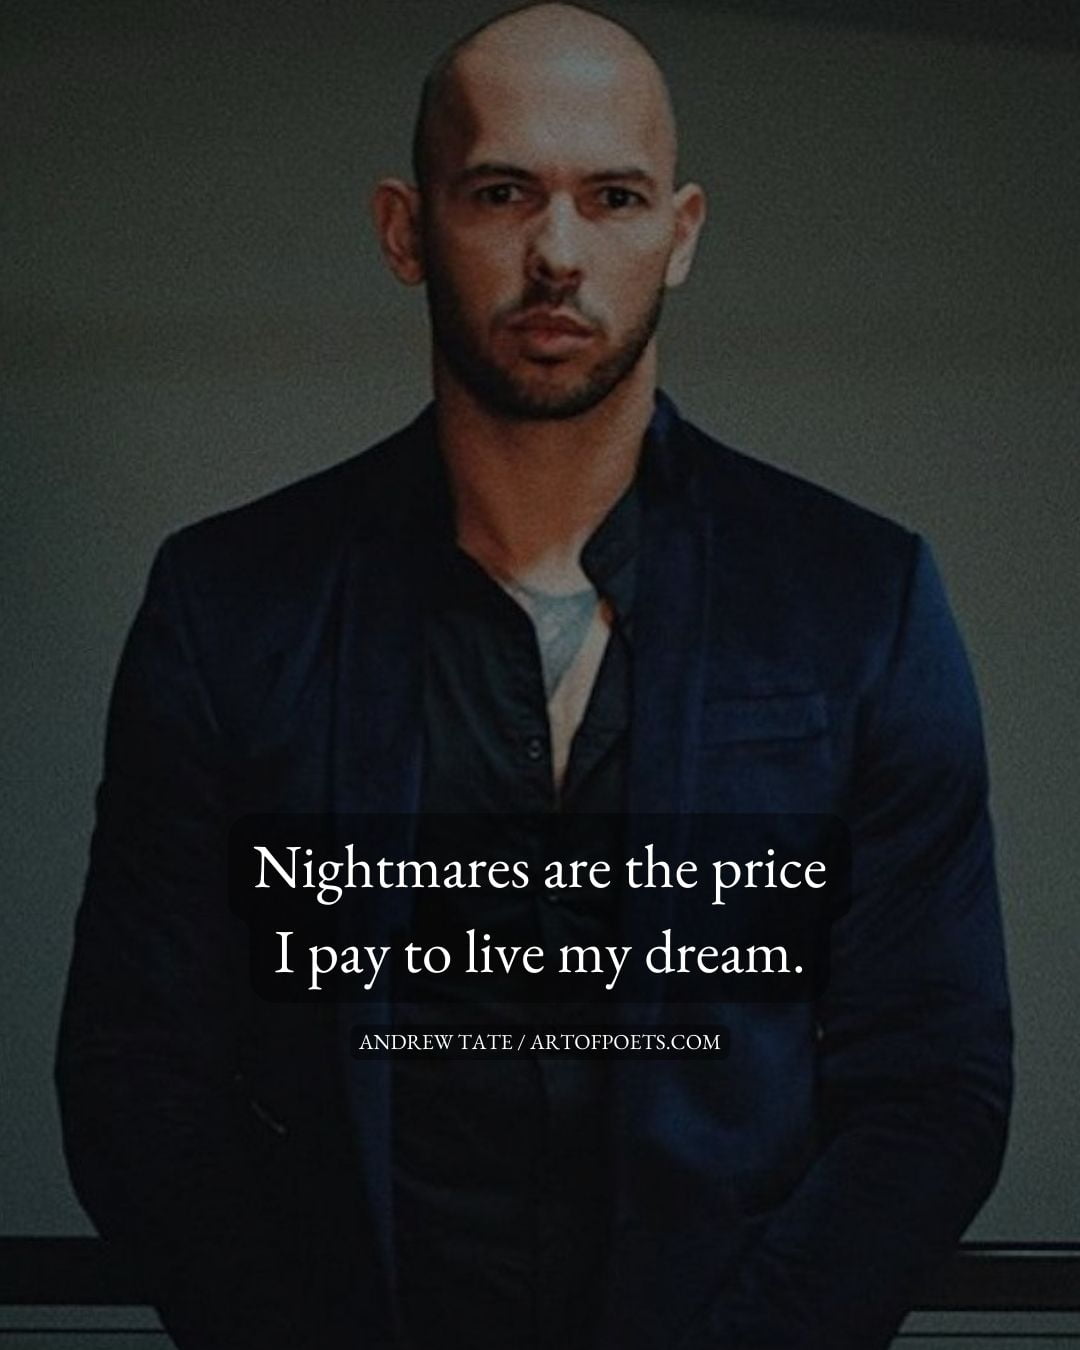 Nightmares are the price I pay to live my dream. – Andrew Tate